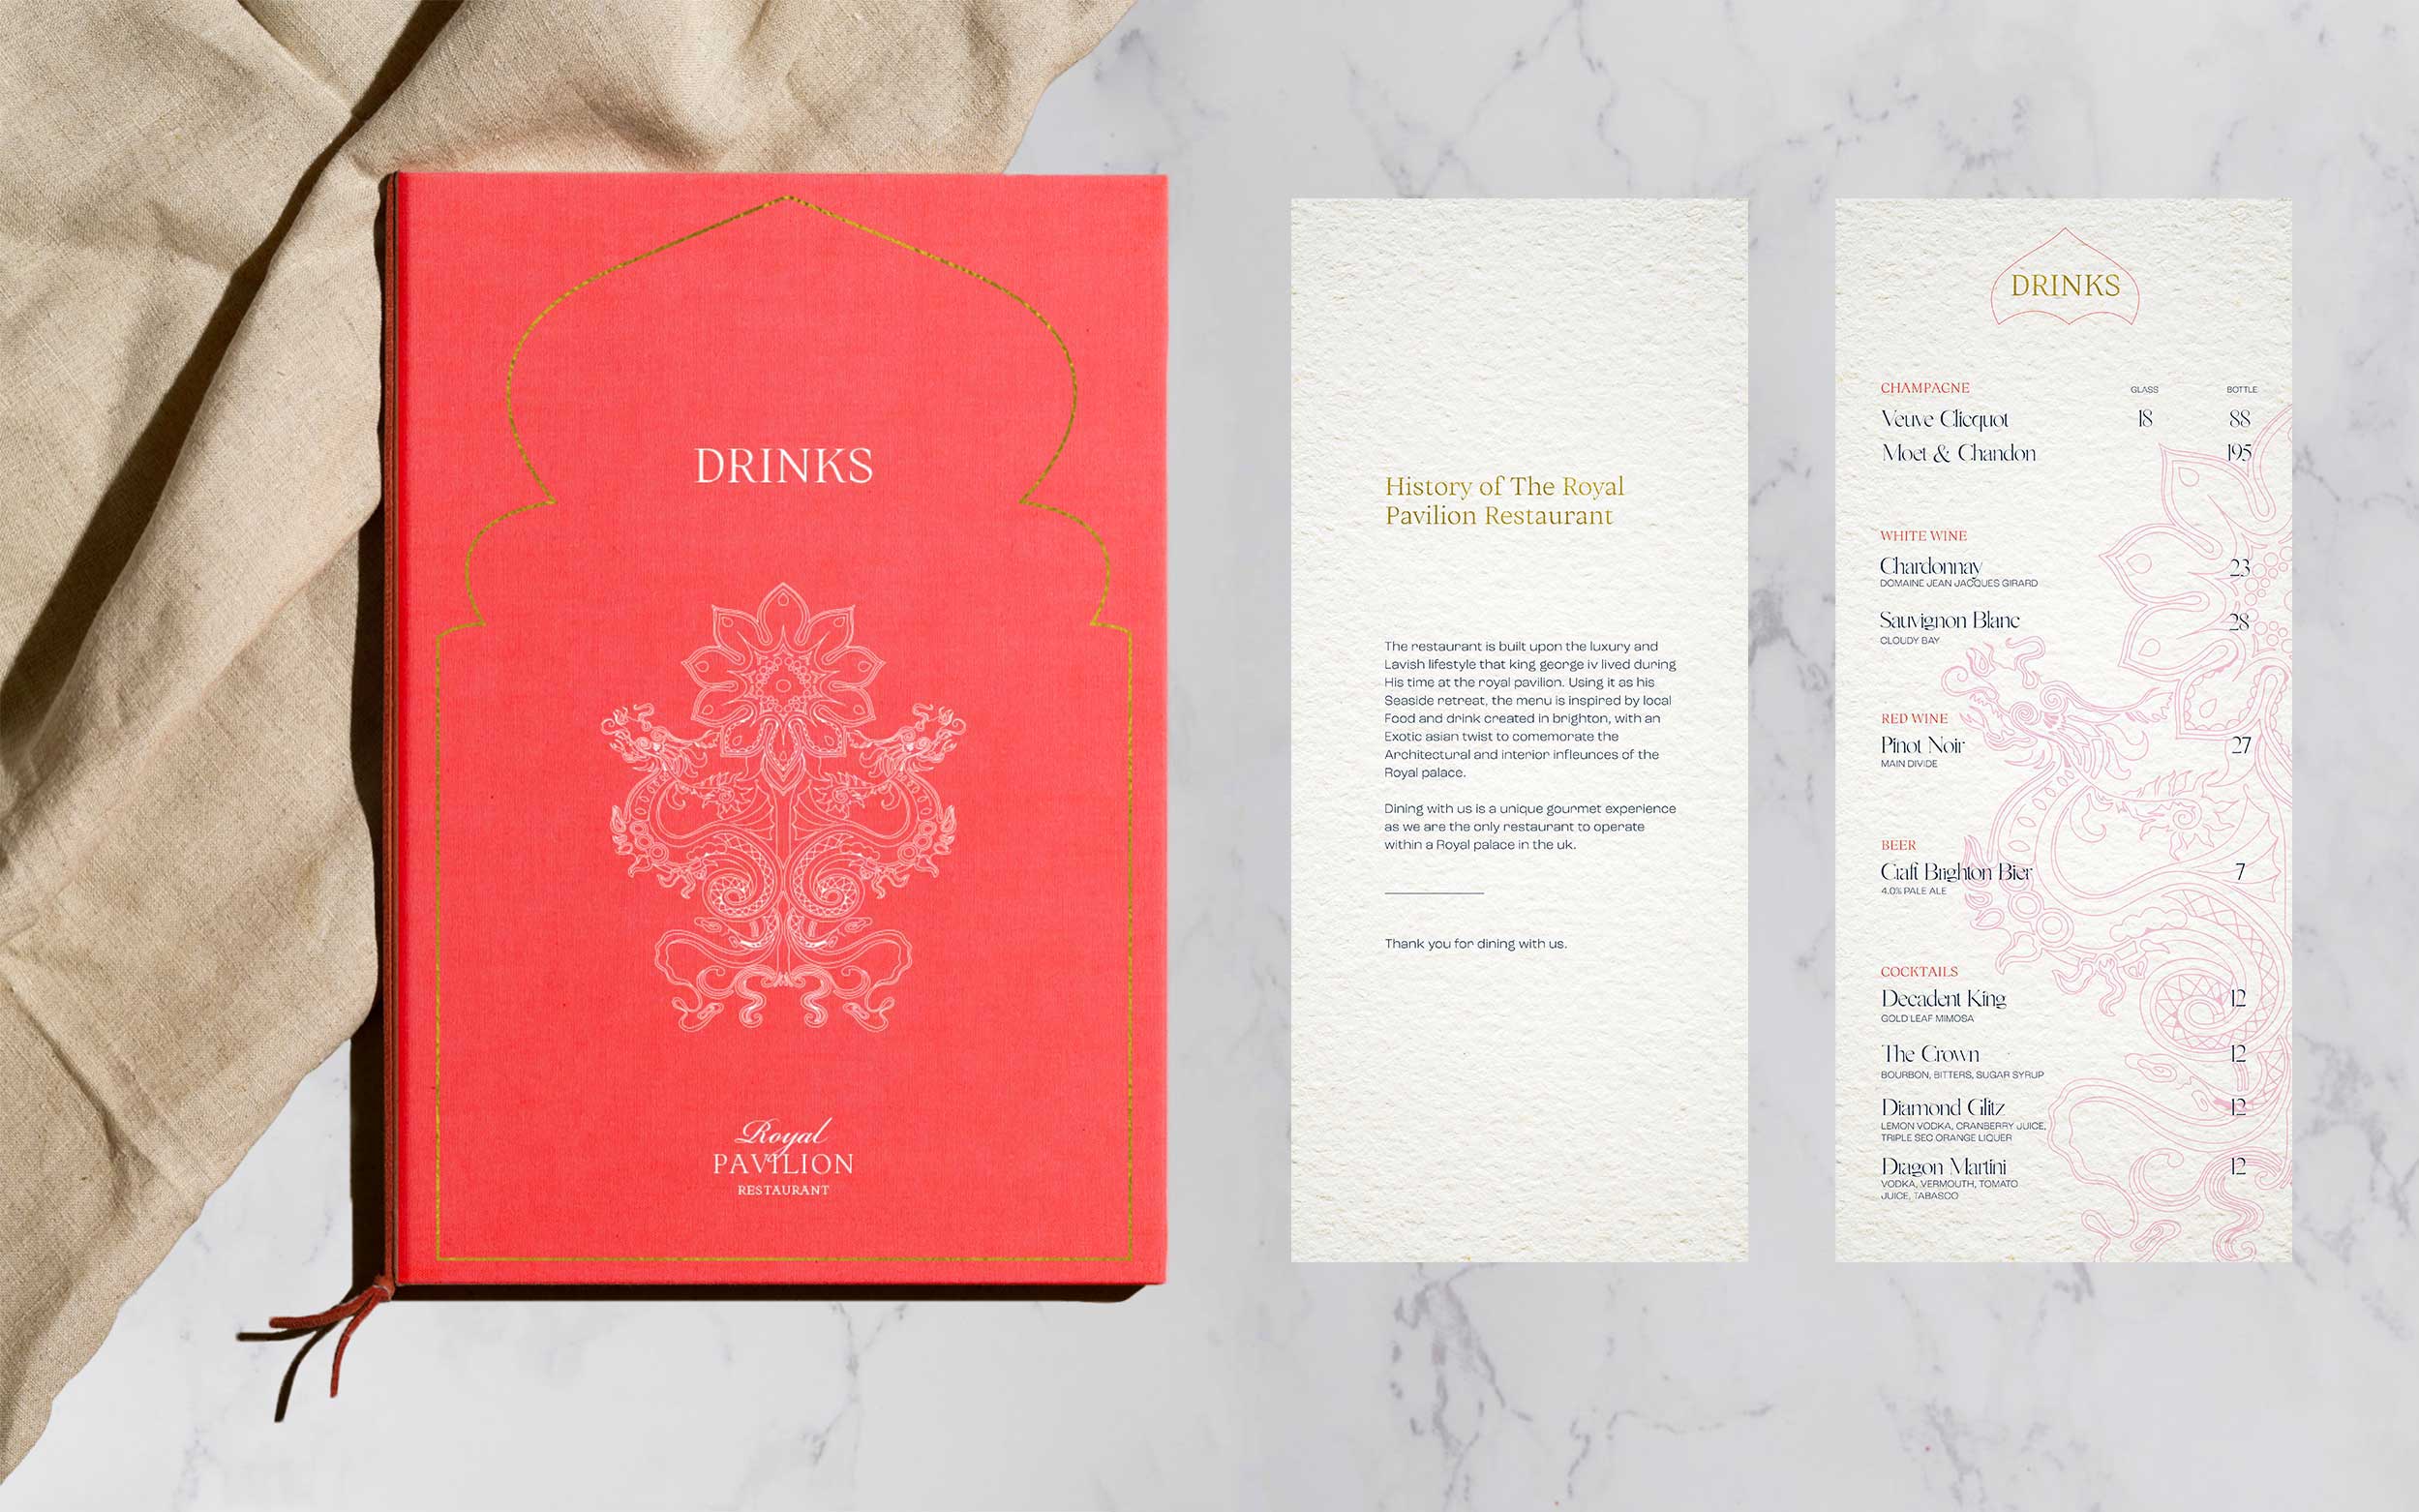 BA Graphic Communication work by Jasmine Parkin showing the red drinks menu featuring a dragon illustration and gold foiling and drinks pages.